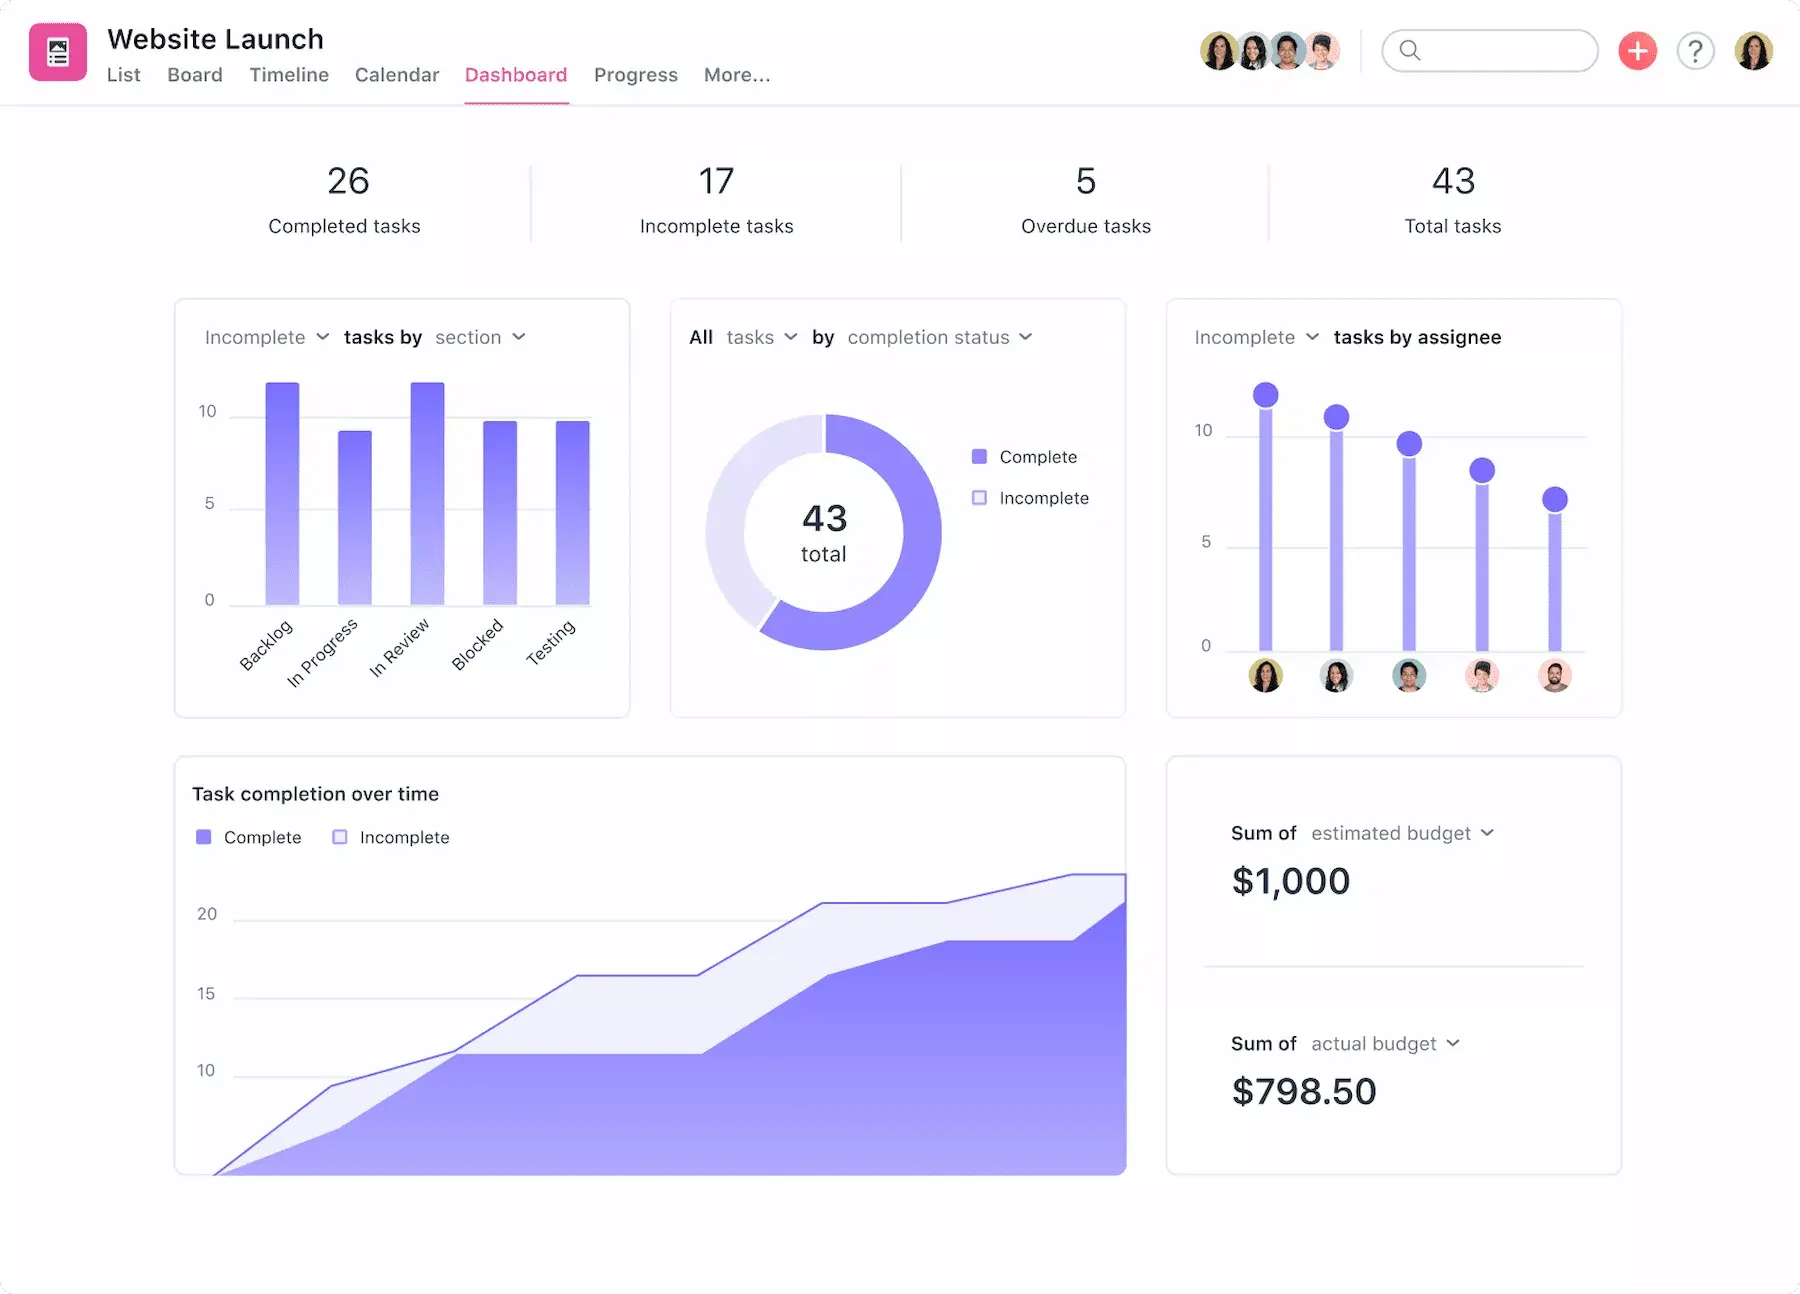 [Product UI] Website launch project dashboard in Asana (Dashboards)